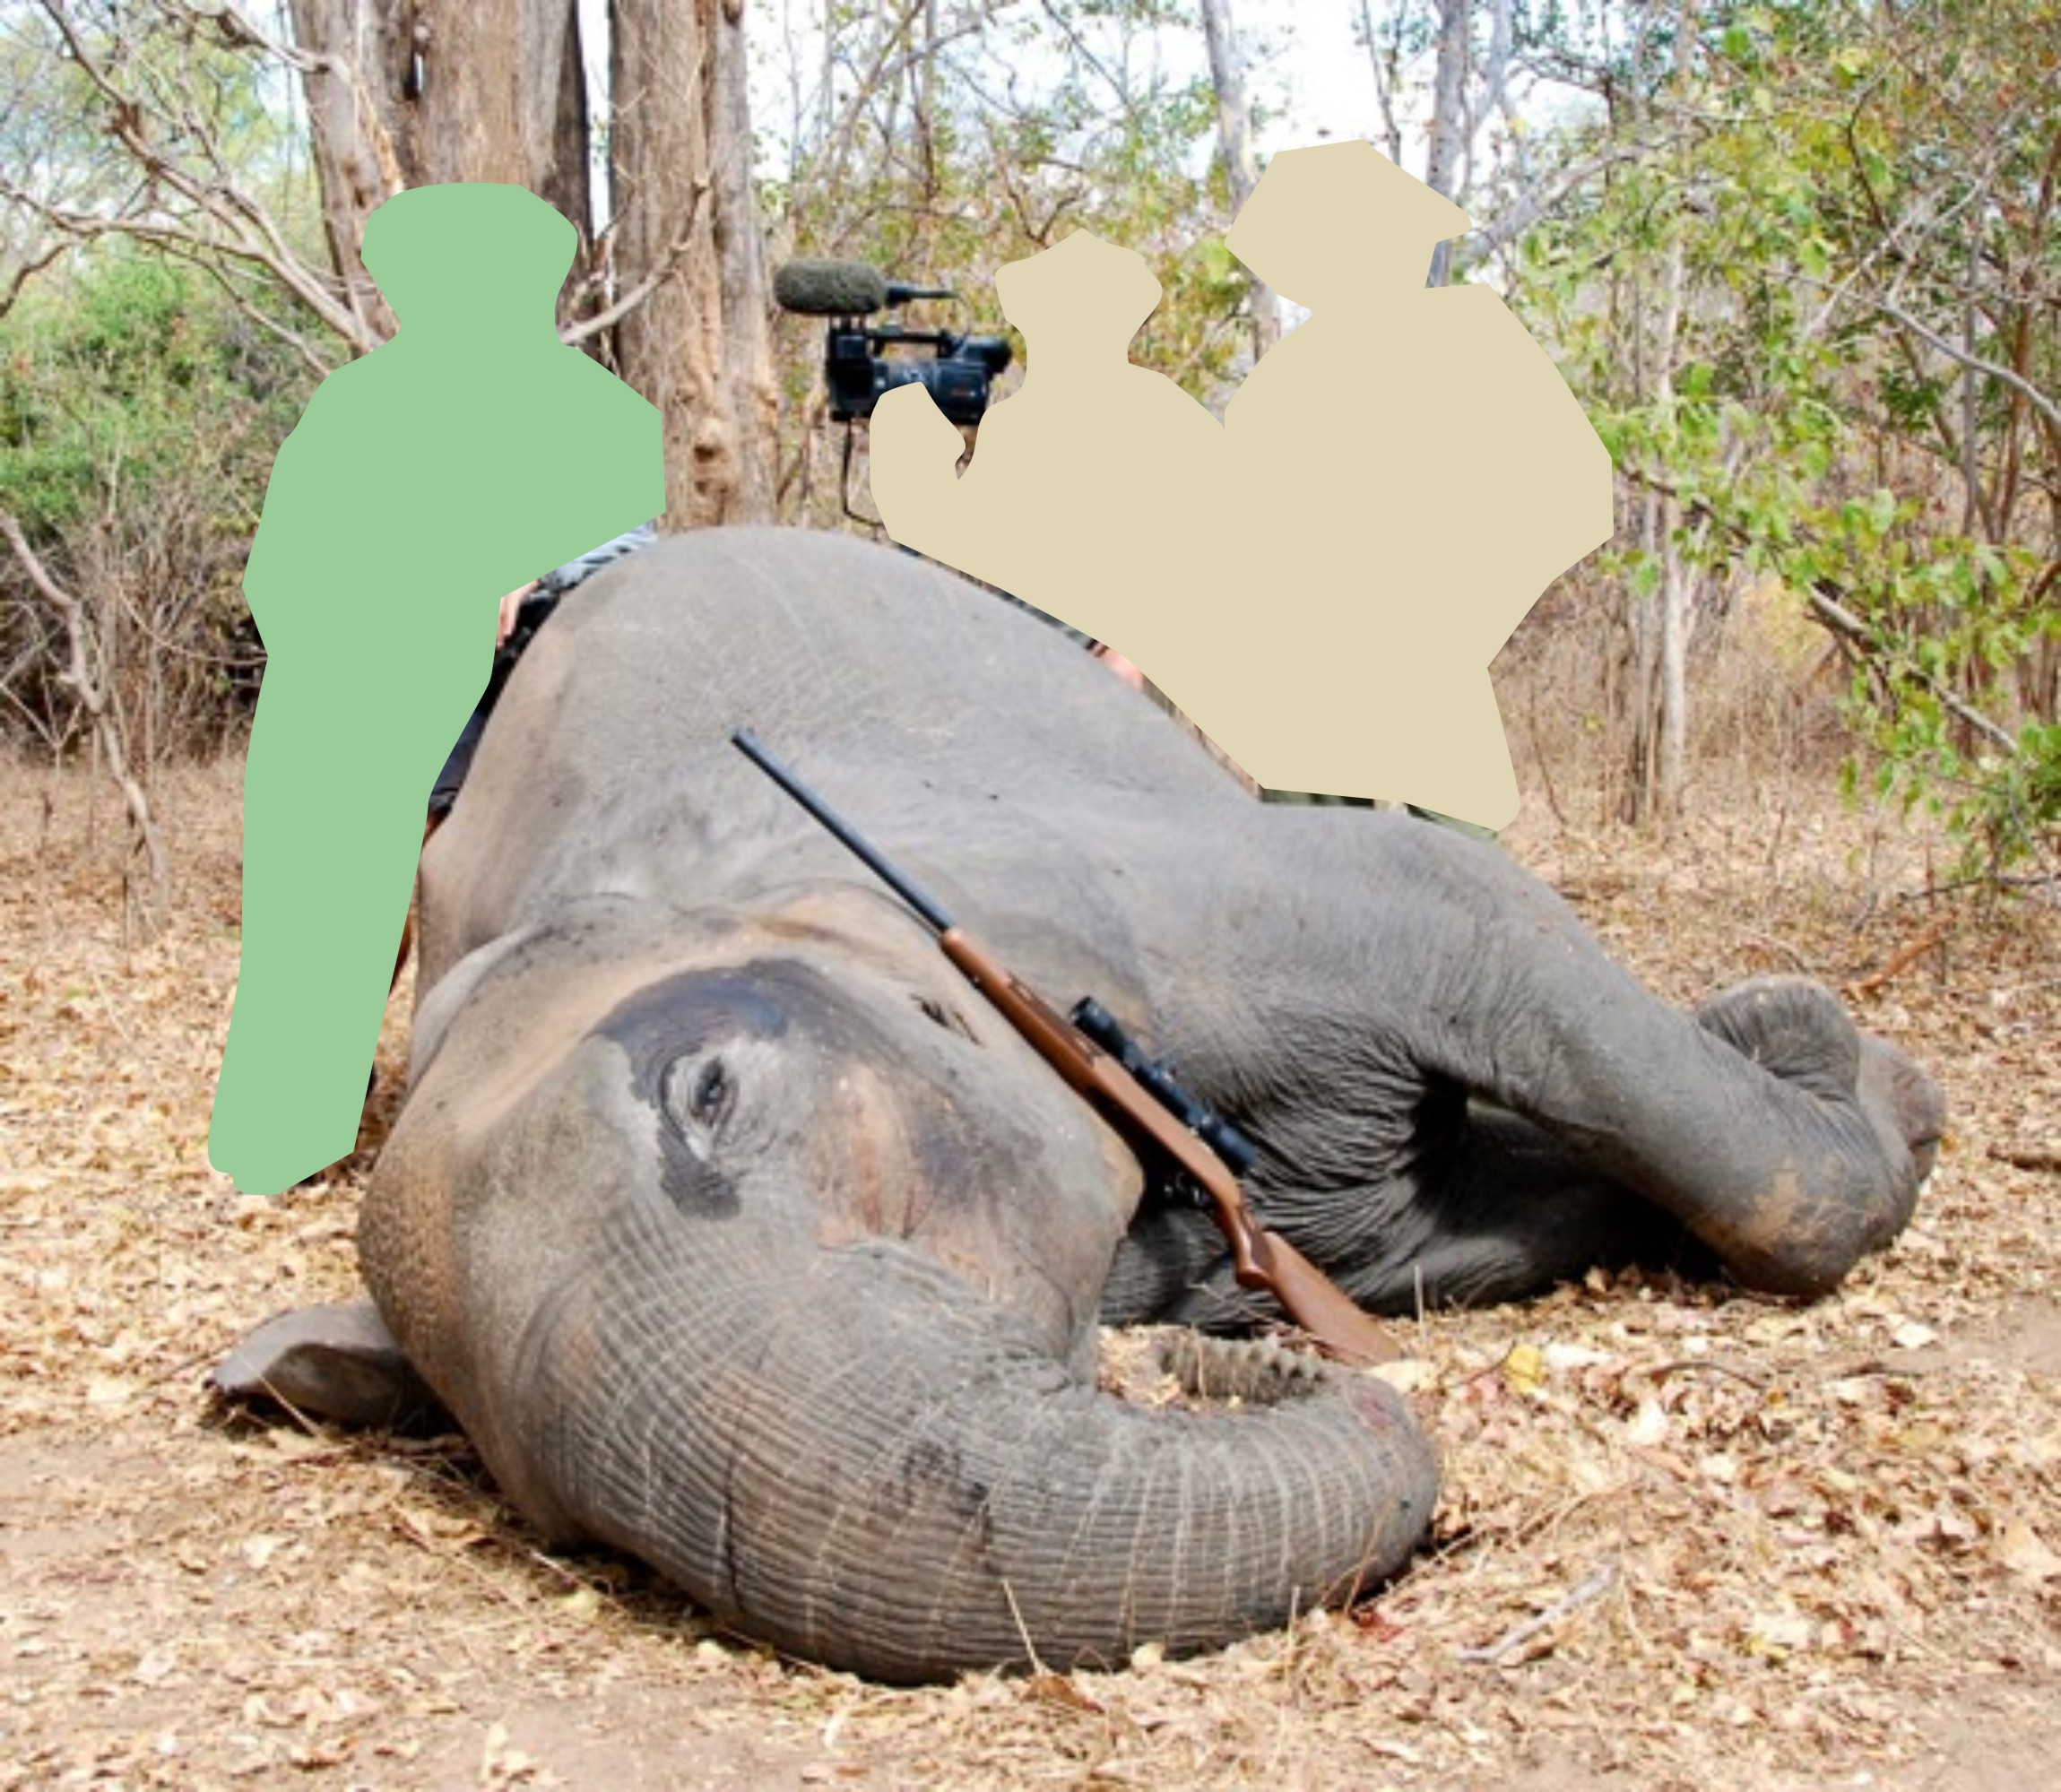 A beautiful elephant died because of global warming. Photographs don't lie.